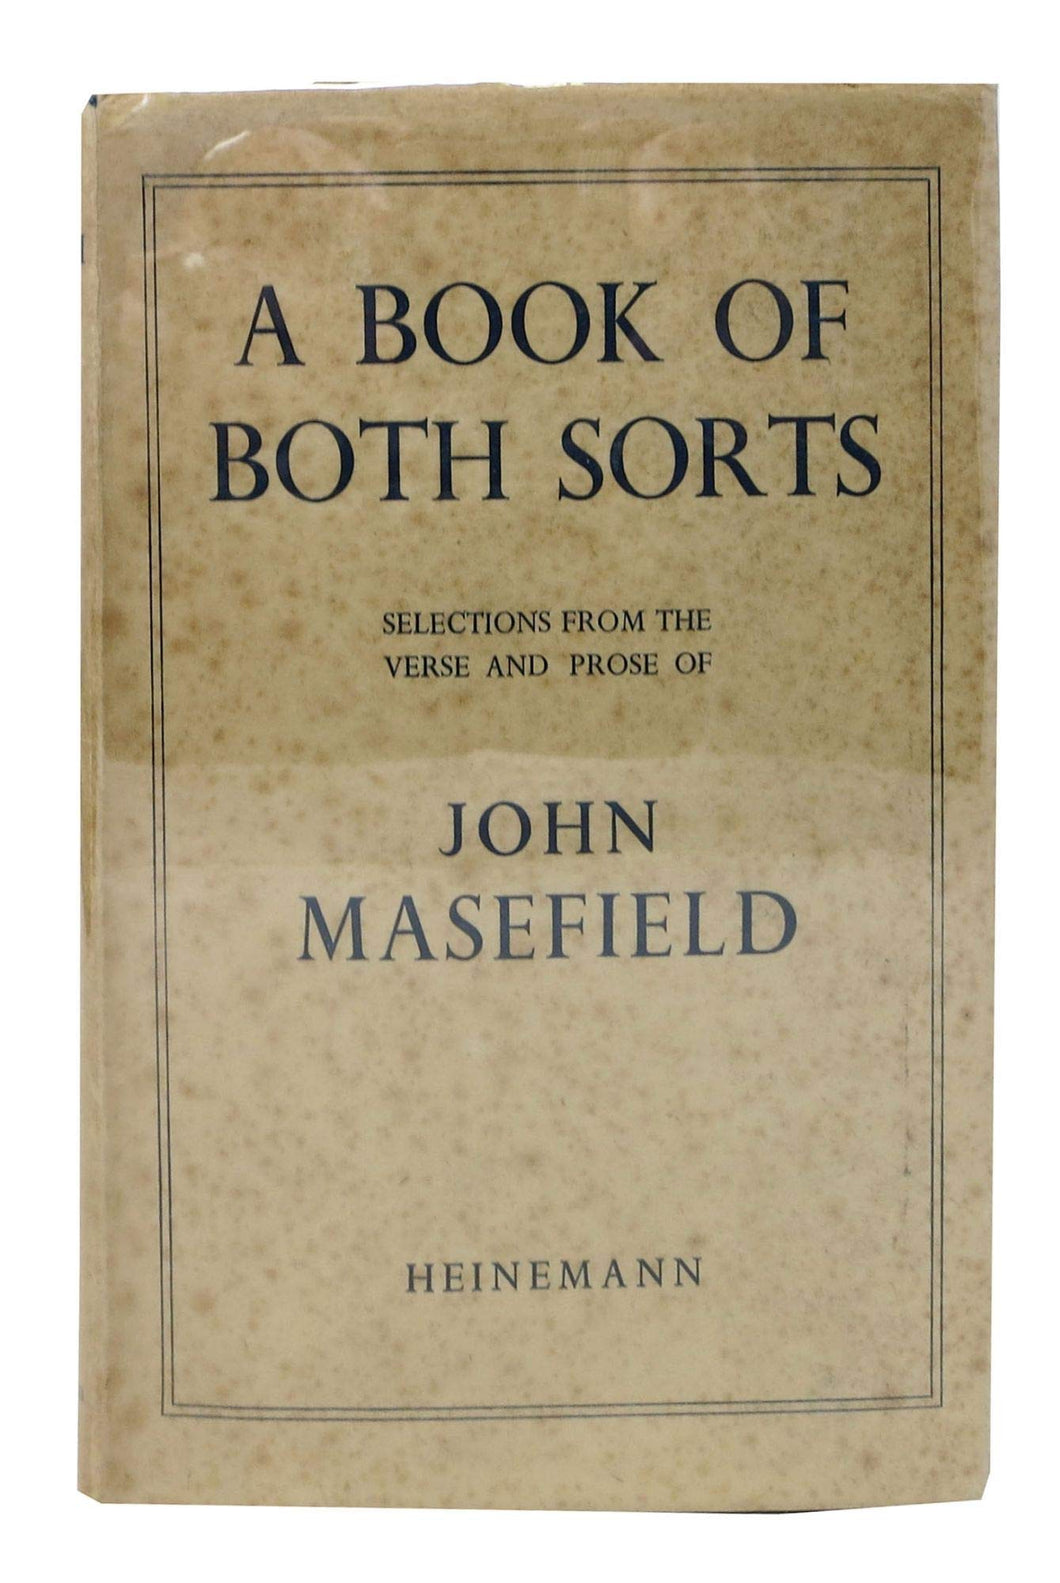 A Book of Both Sorts: Selections from Verse and Prose of John Masefield [Hardcover] John Masefield